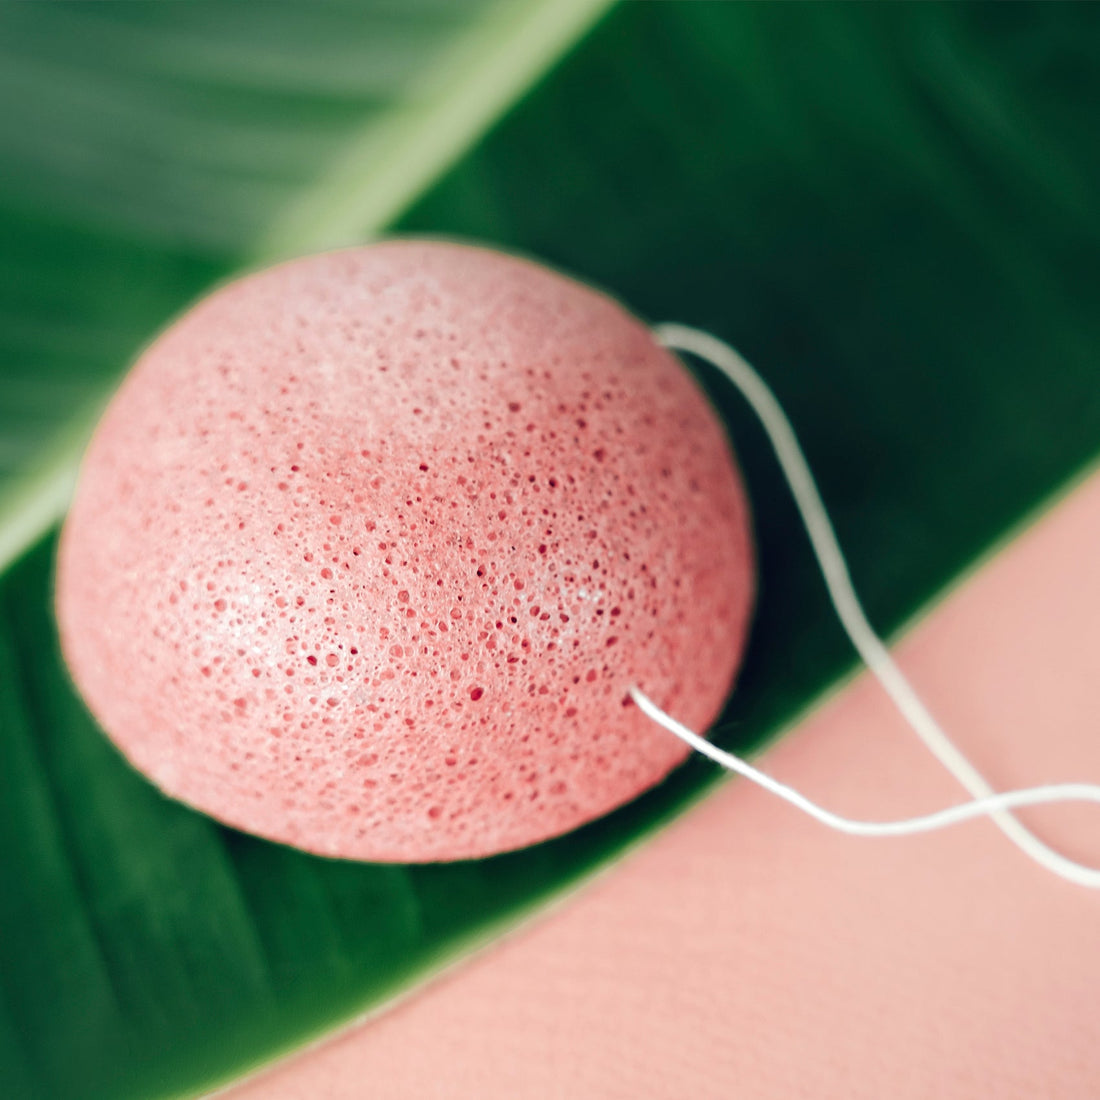 BRÜUN Konjac Puff Sponge for Face and Body | Natural and Reusable Scrubber for Cleaning Make up and Dust for All Skin Types SH-Konjac Facepuff sponge Bruun Beauty 